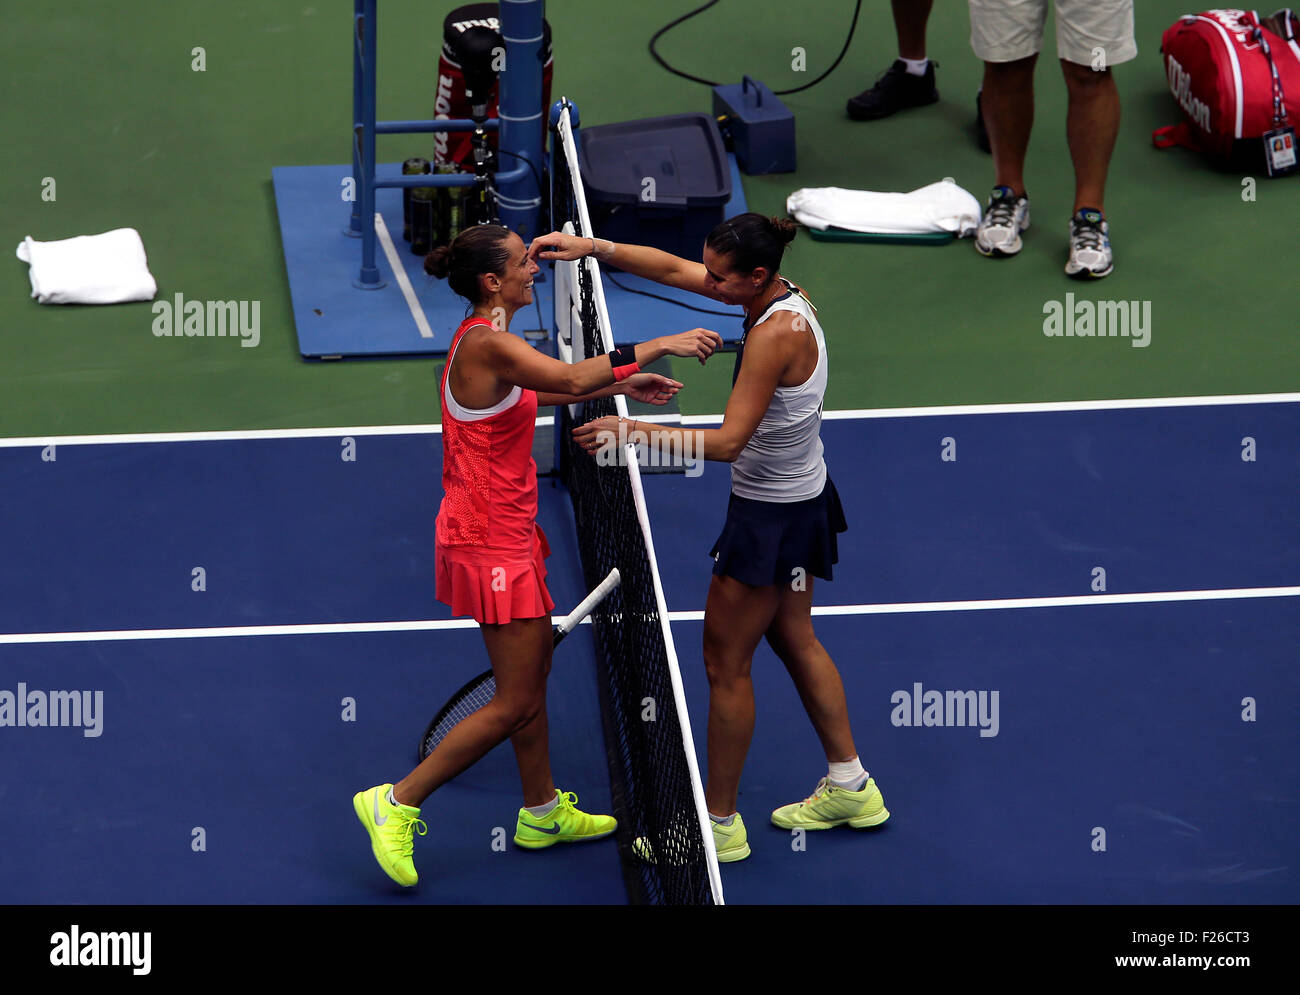 New York, USA. 12th Sep, 2015. Flavia Penetta of Italy, right, receives a hug from countrywoman Roberta Vinci after defeating Vinci 7-6 (7-4), 6-2, in the finals of the U.S. Open at Flushing Meadows, New York on the afternoon of September 12th, 2015. Credit:  Adam Stoltman/Alamy Live News Stock Photo